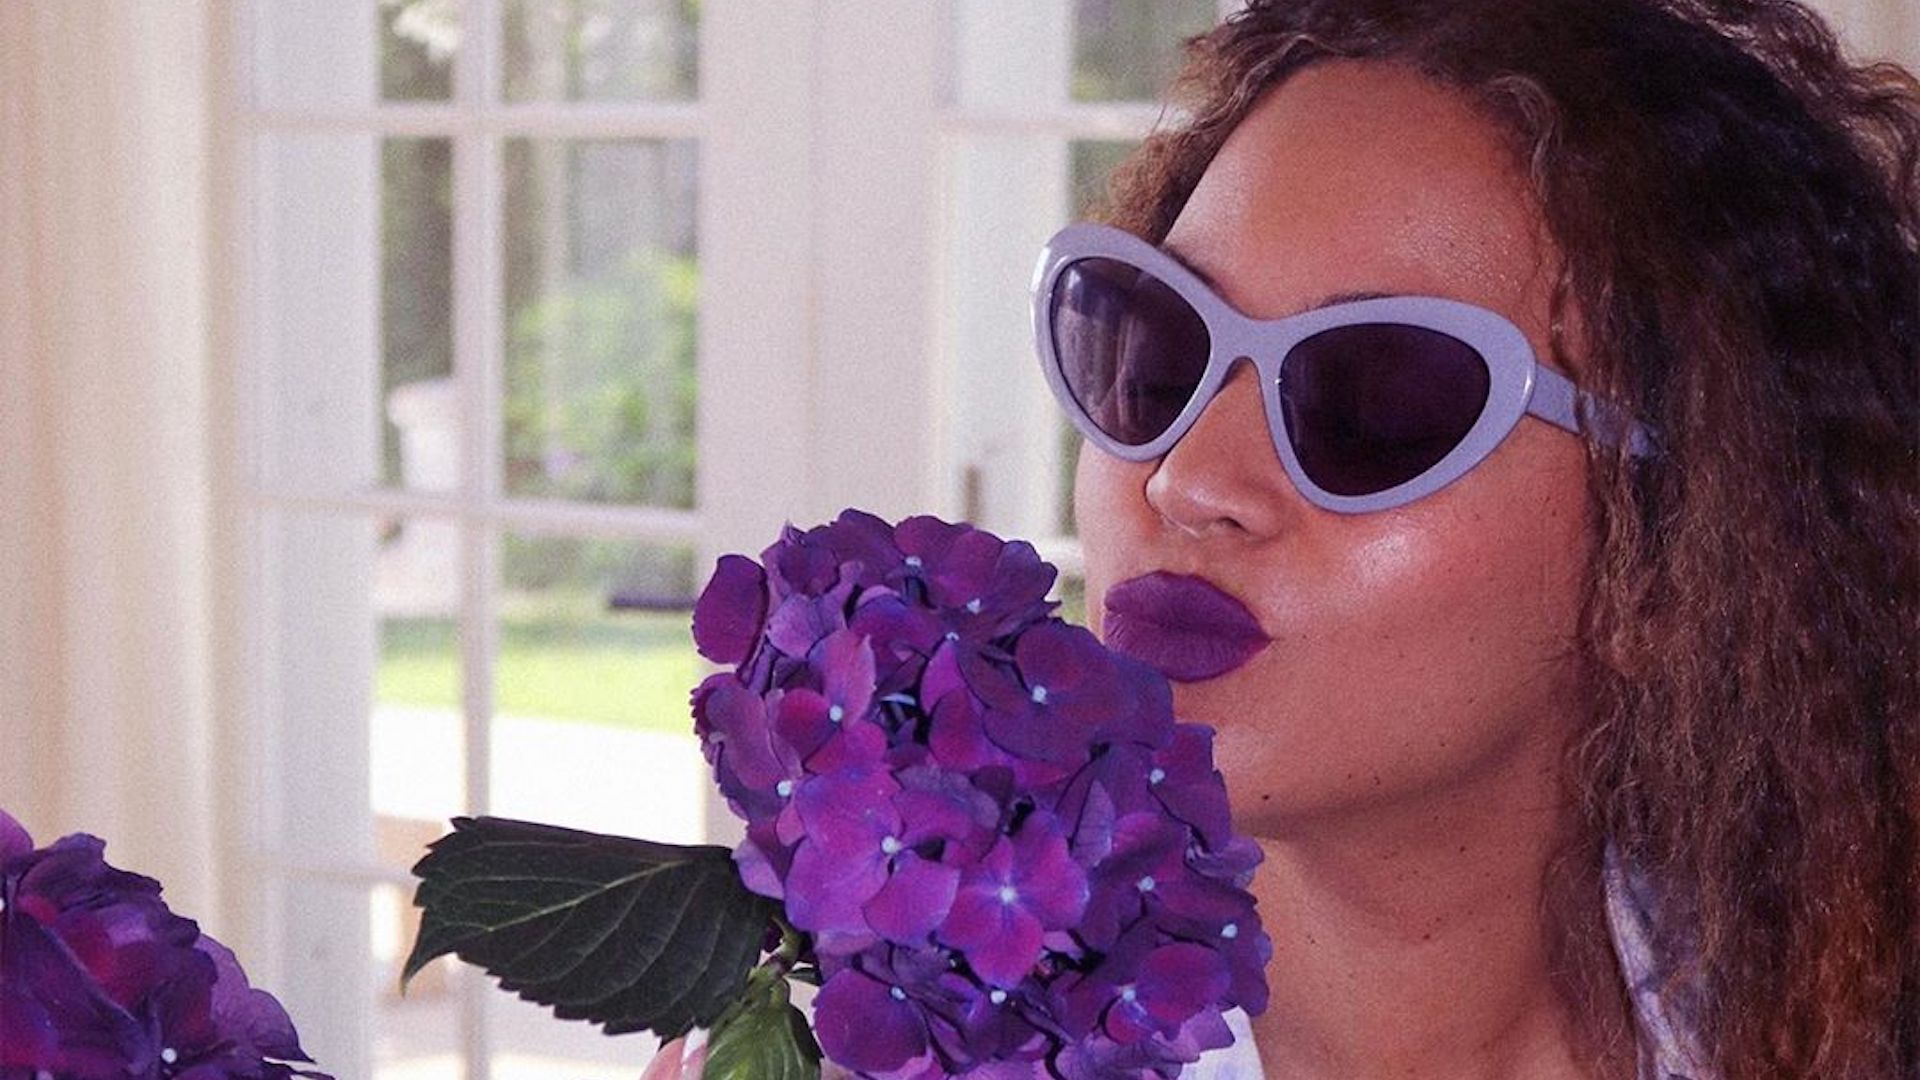 Beyonce smelling a large purple flower